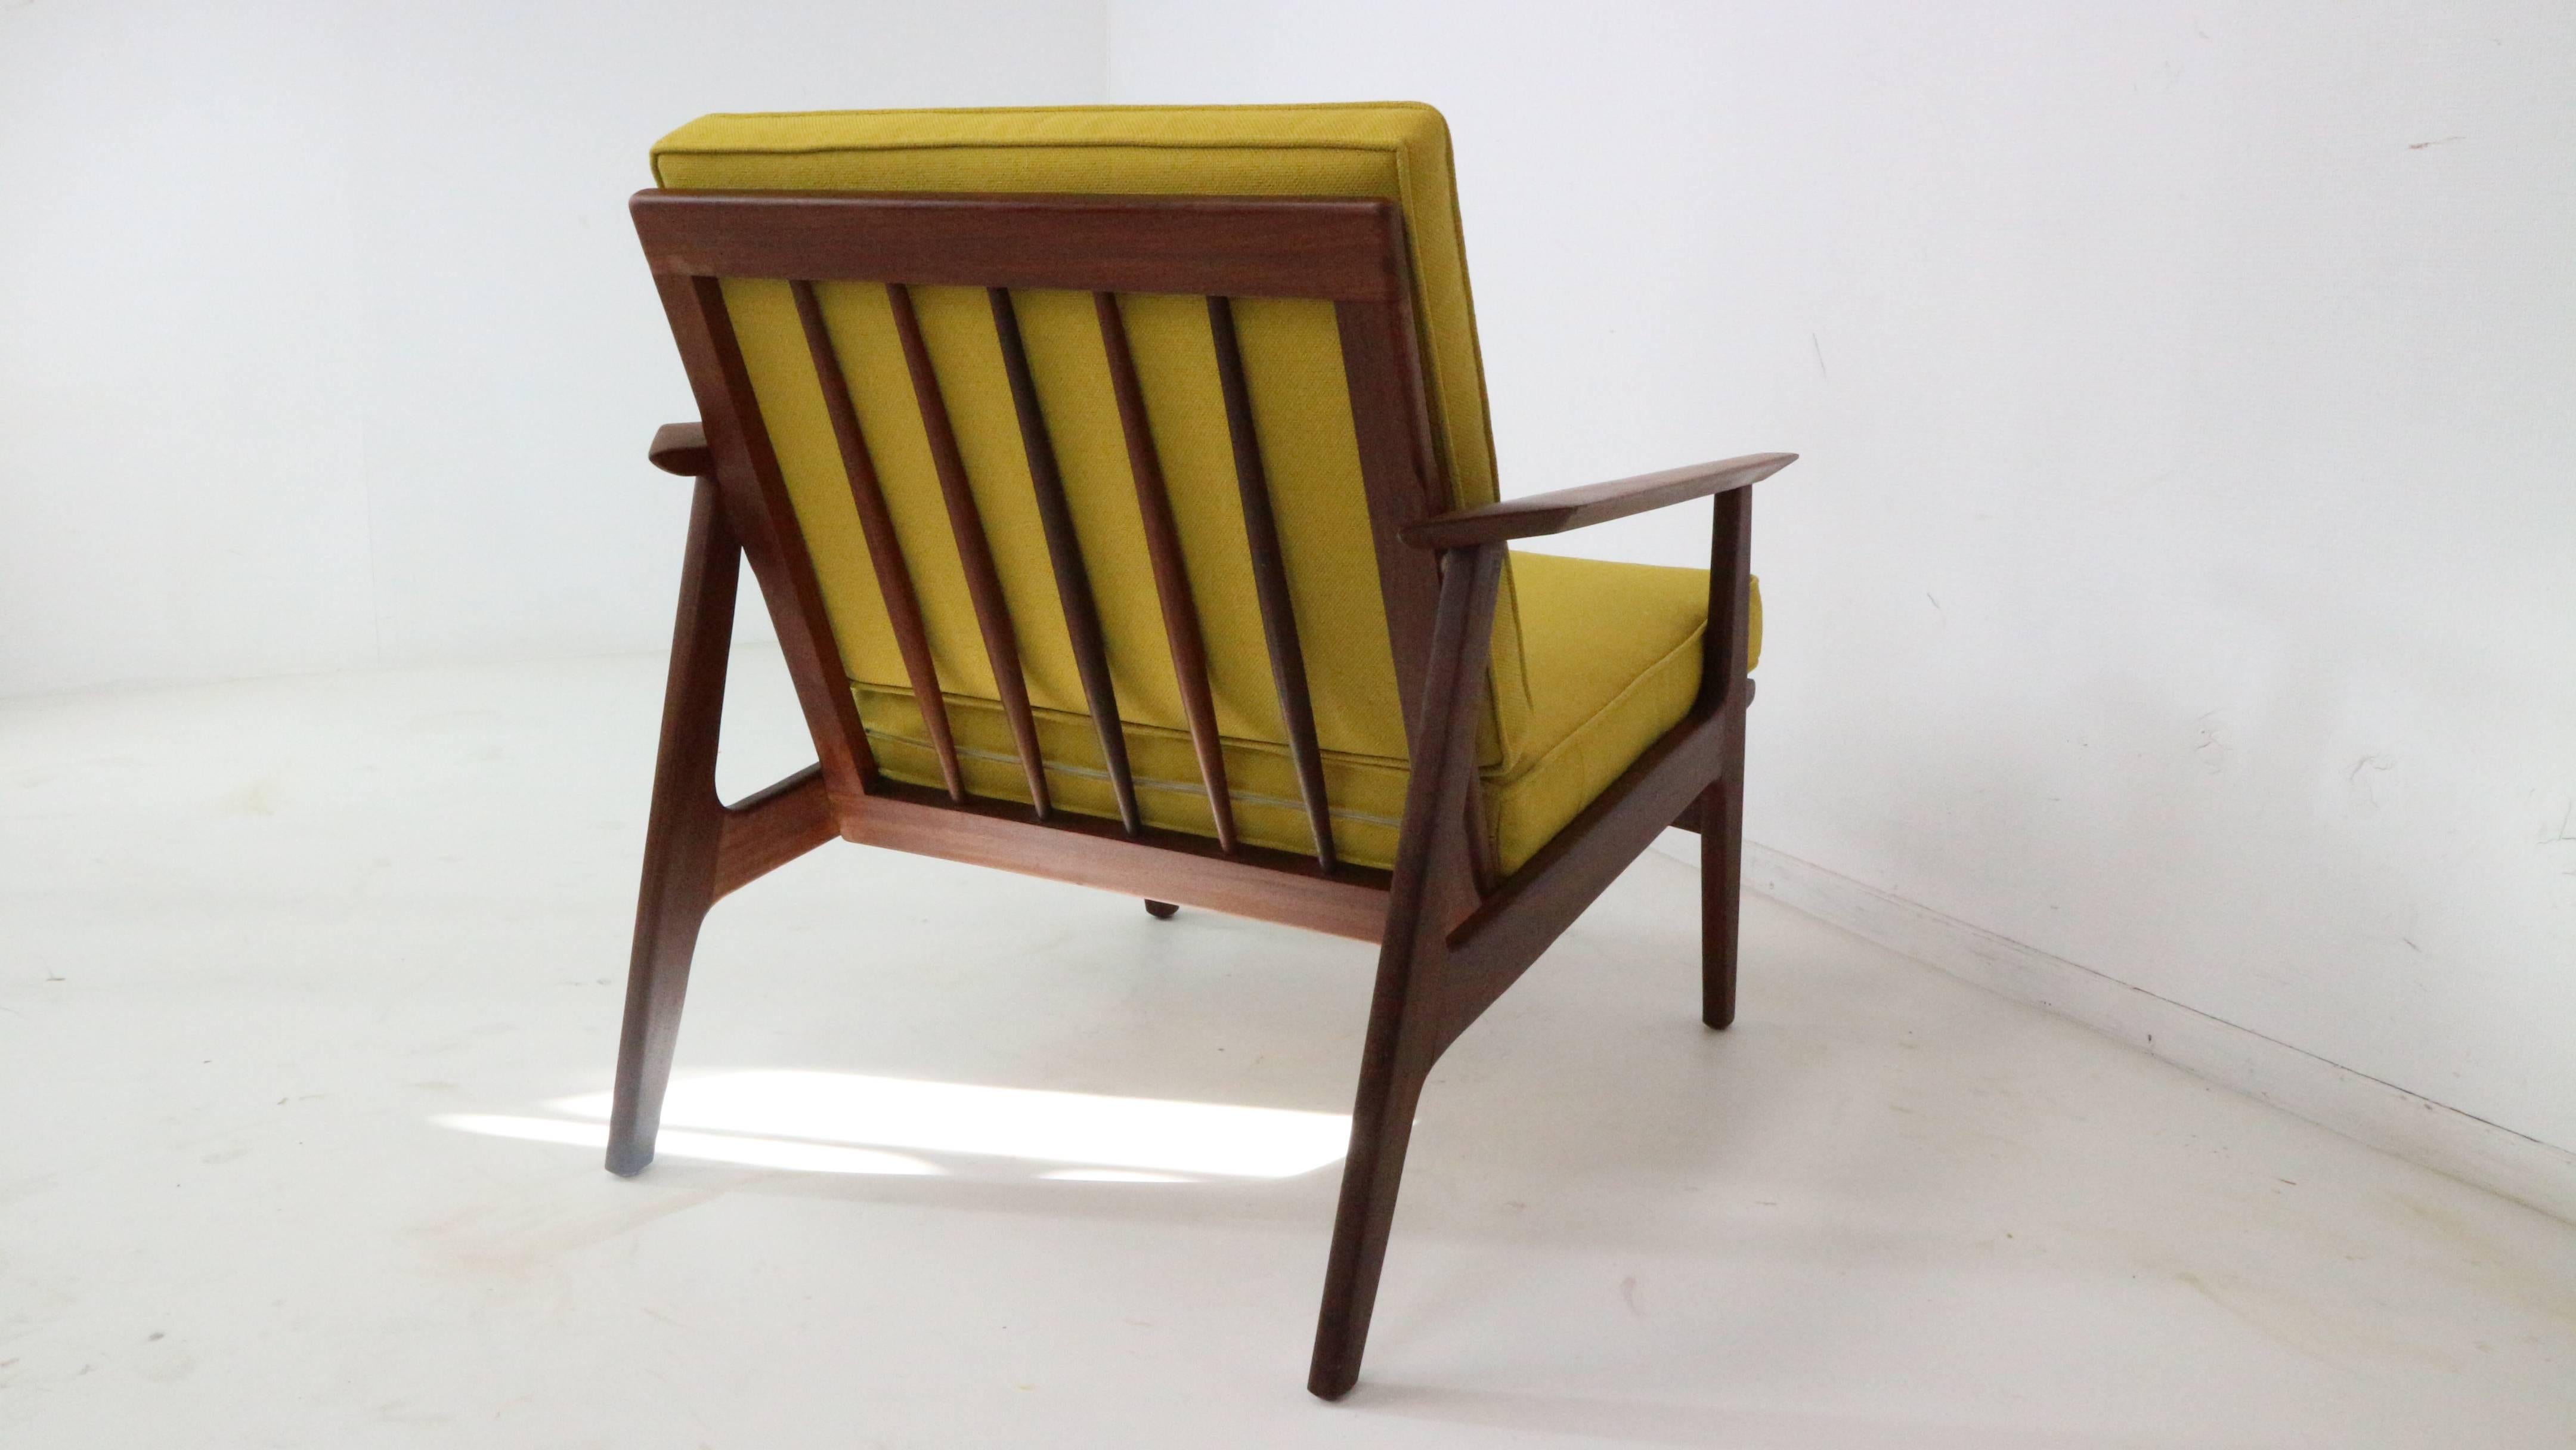 Sharp lines and well designed vintage Danish lounge chair.
The mustard yellow fabric gives a perfect contrast with the darker wood, tree chairs available.